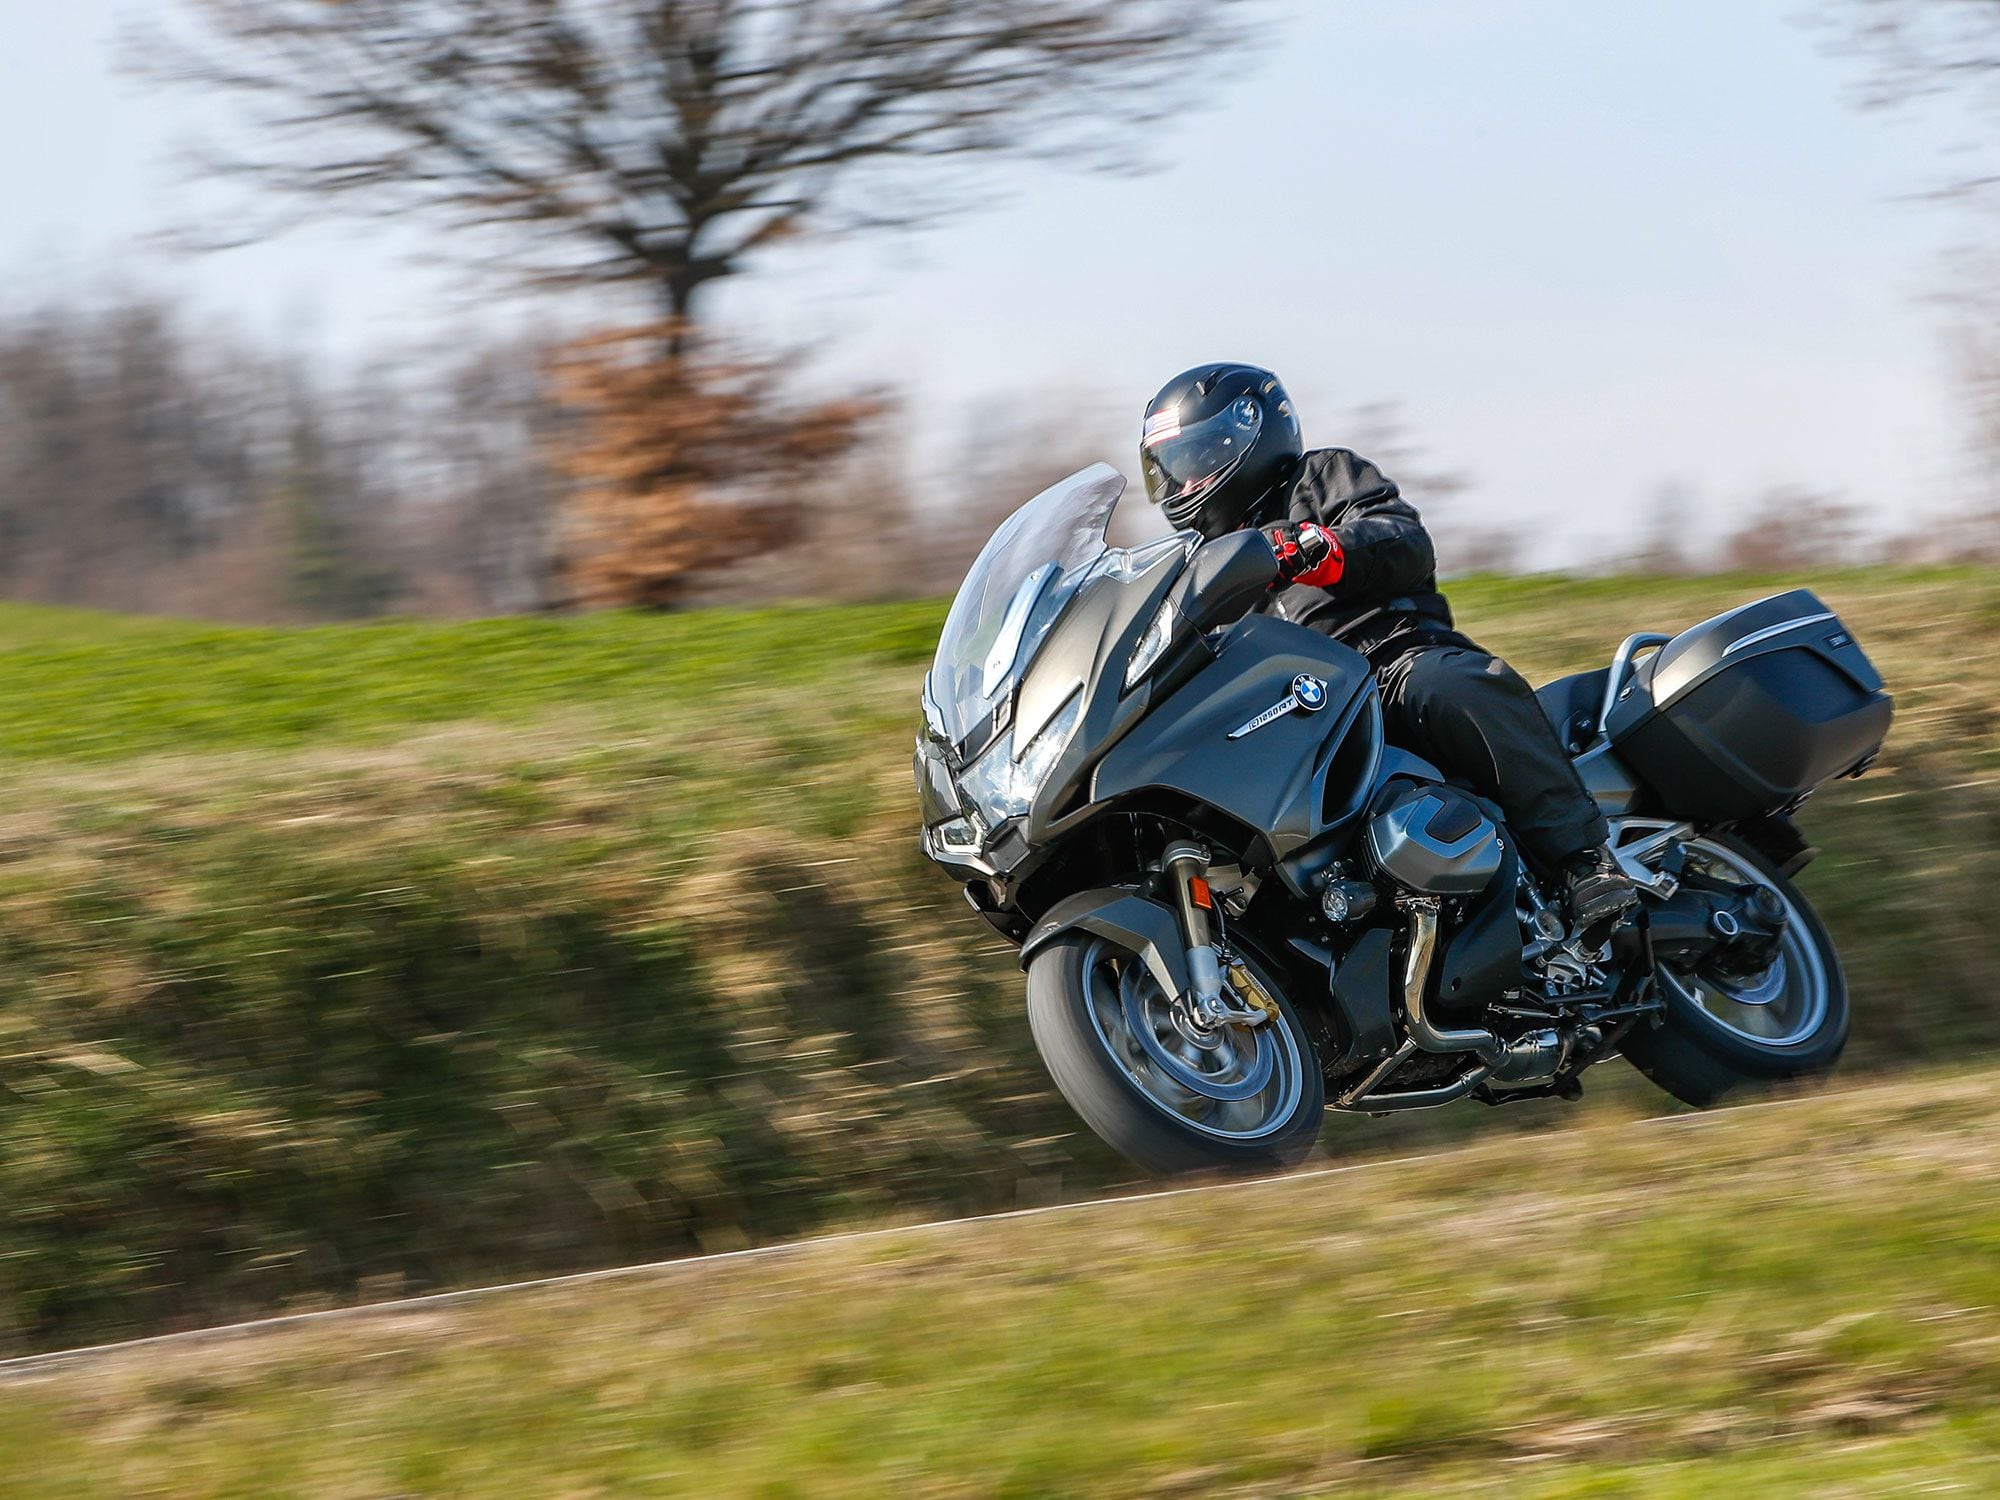 The 2021 BMW R 1250 RT gets a ton of tech in a comfortable and capable chassis.